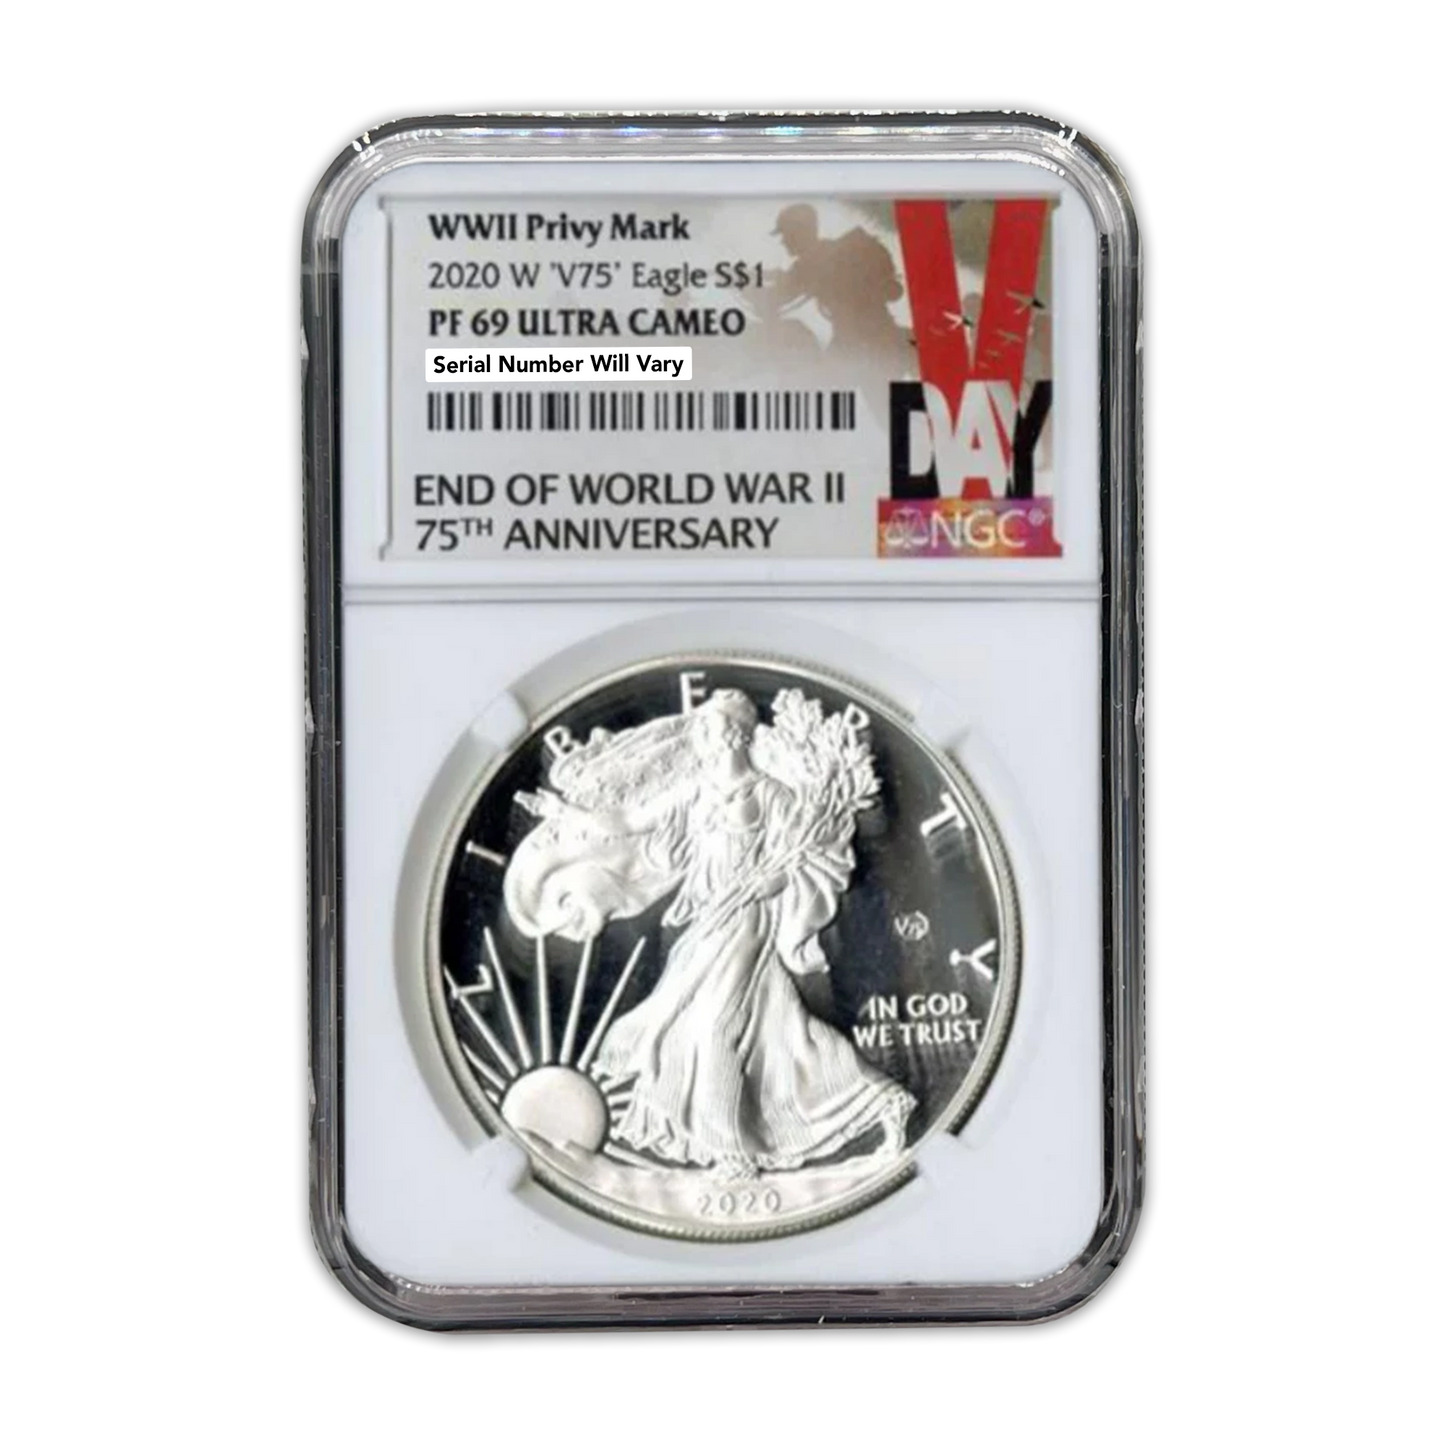 2020 (W) Silver Eagle -  NGC PF69 Ultra Cameo WWII v75 Privy